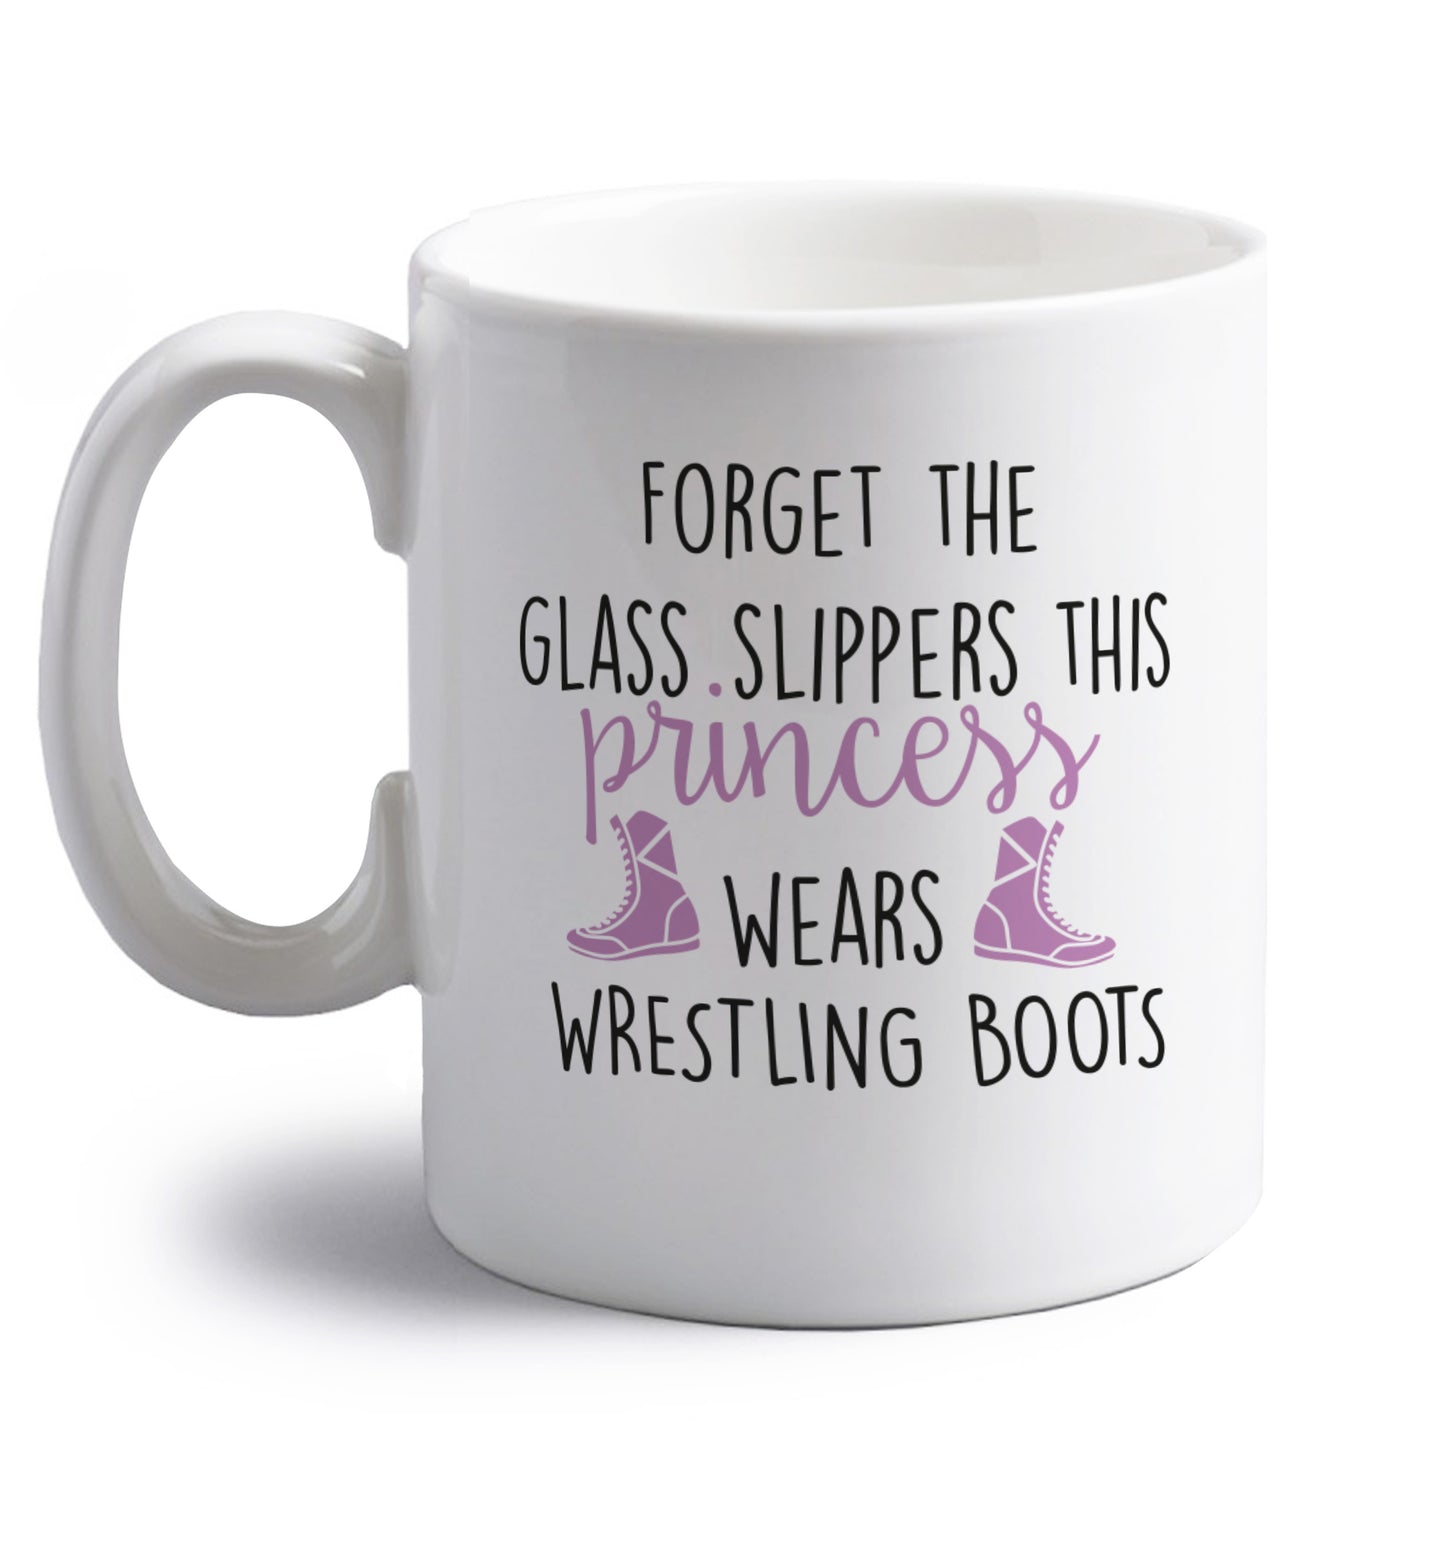 Forget the glass slippers this princess wears wrestling boots right handed white ceramic mug 